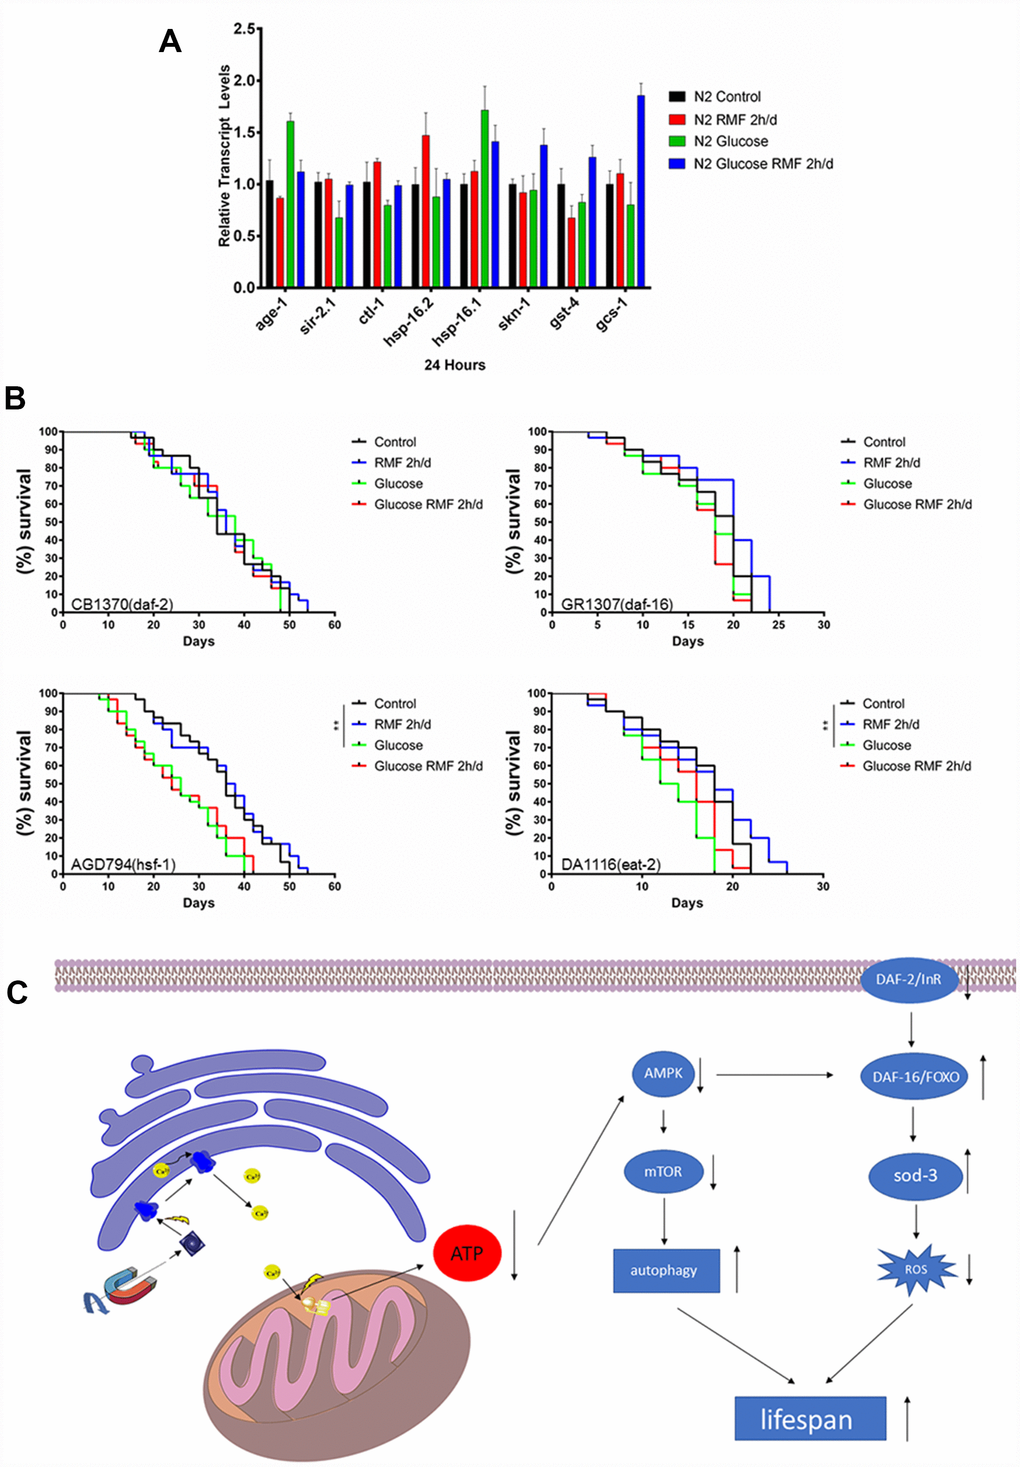 The molecular mechanism underlying the anti-aging effect of RMF. (A) The mRNA levels of hsp-16.1, hsp-16.2, age-1, sir-2.1, ctl-1, skn-1, gst-4 and gcs-1 were determined by quantitative real-time RT-PCR and normalized to the expression of act-1. At least 3000 C. elegans were used in each group and the experiments were performed on three independent occasions. Means with different letters were significantly different at P B) RMF extended lifespan of the hsf-1 (AGD794) and eat-2 (DA1116) mutants. RMF did not extend lifespan of the daf-2 (CB1370) and daf-16 (CR1307) deletion mutants. The lifespan analysis of each mutant was performed on three independent occasions. (C) A possible mode of action of the longevity extension mediated by RMF.